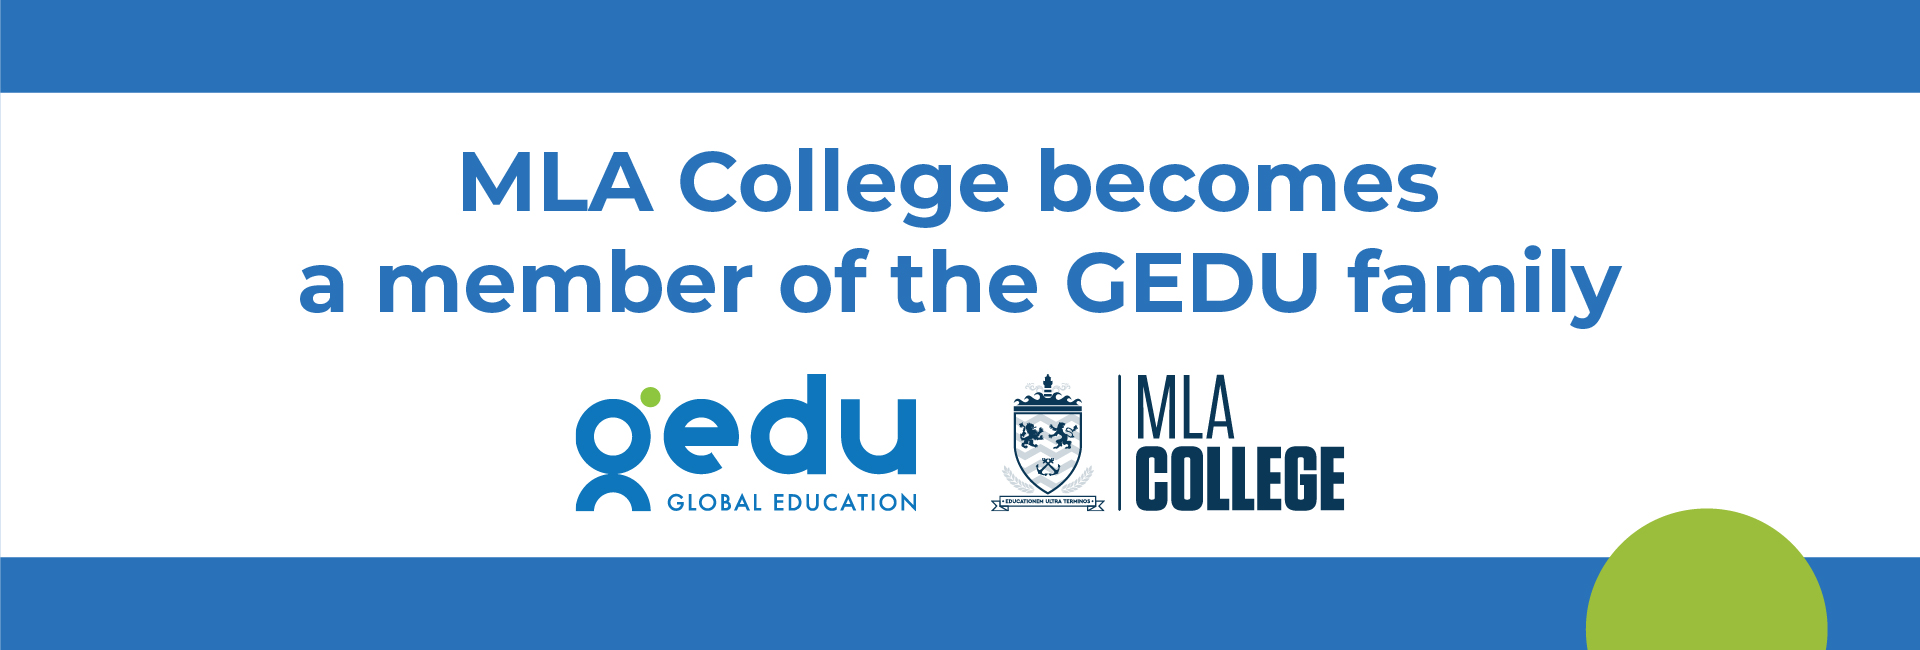 Global Education Holdings Acquires MLA College